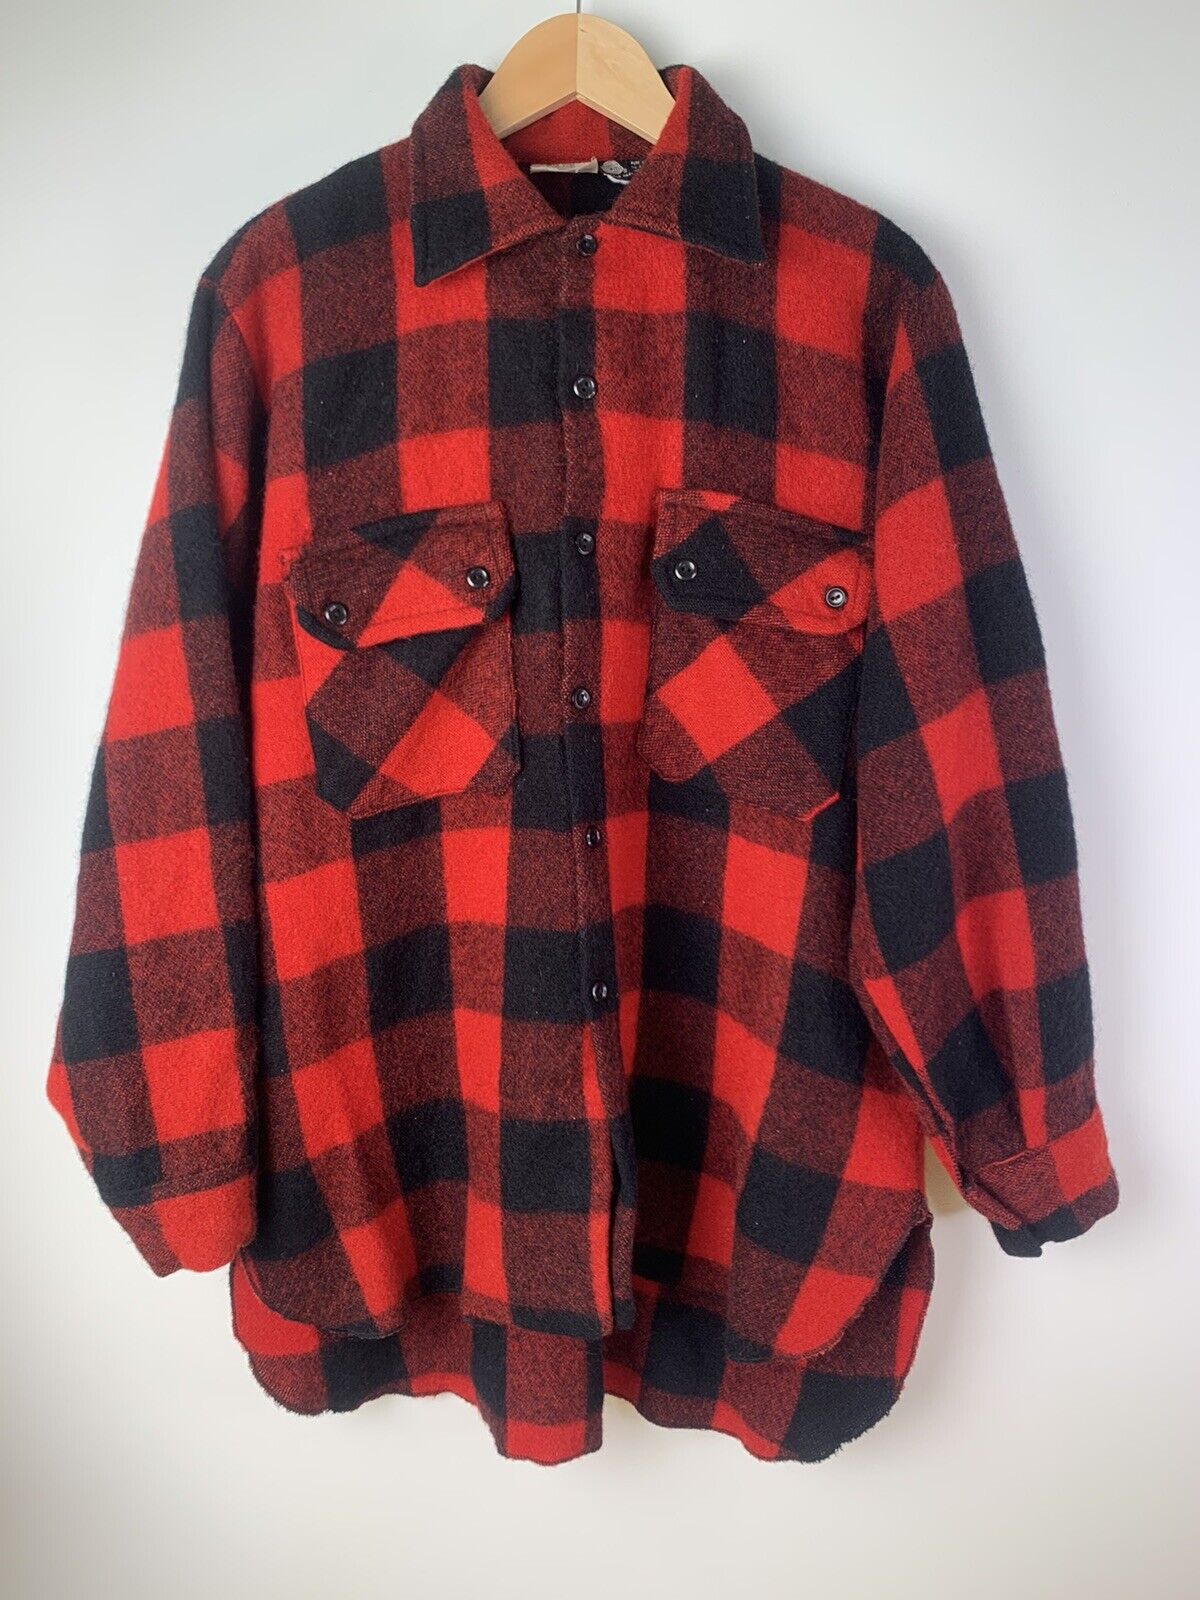 Vintage Max 53% OFF Buffalo Plaid Shirt Jacksonville Mall Pure Thick Flannel Outdoor Camp Wool